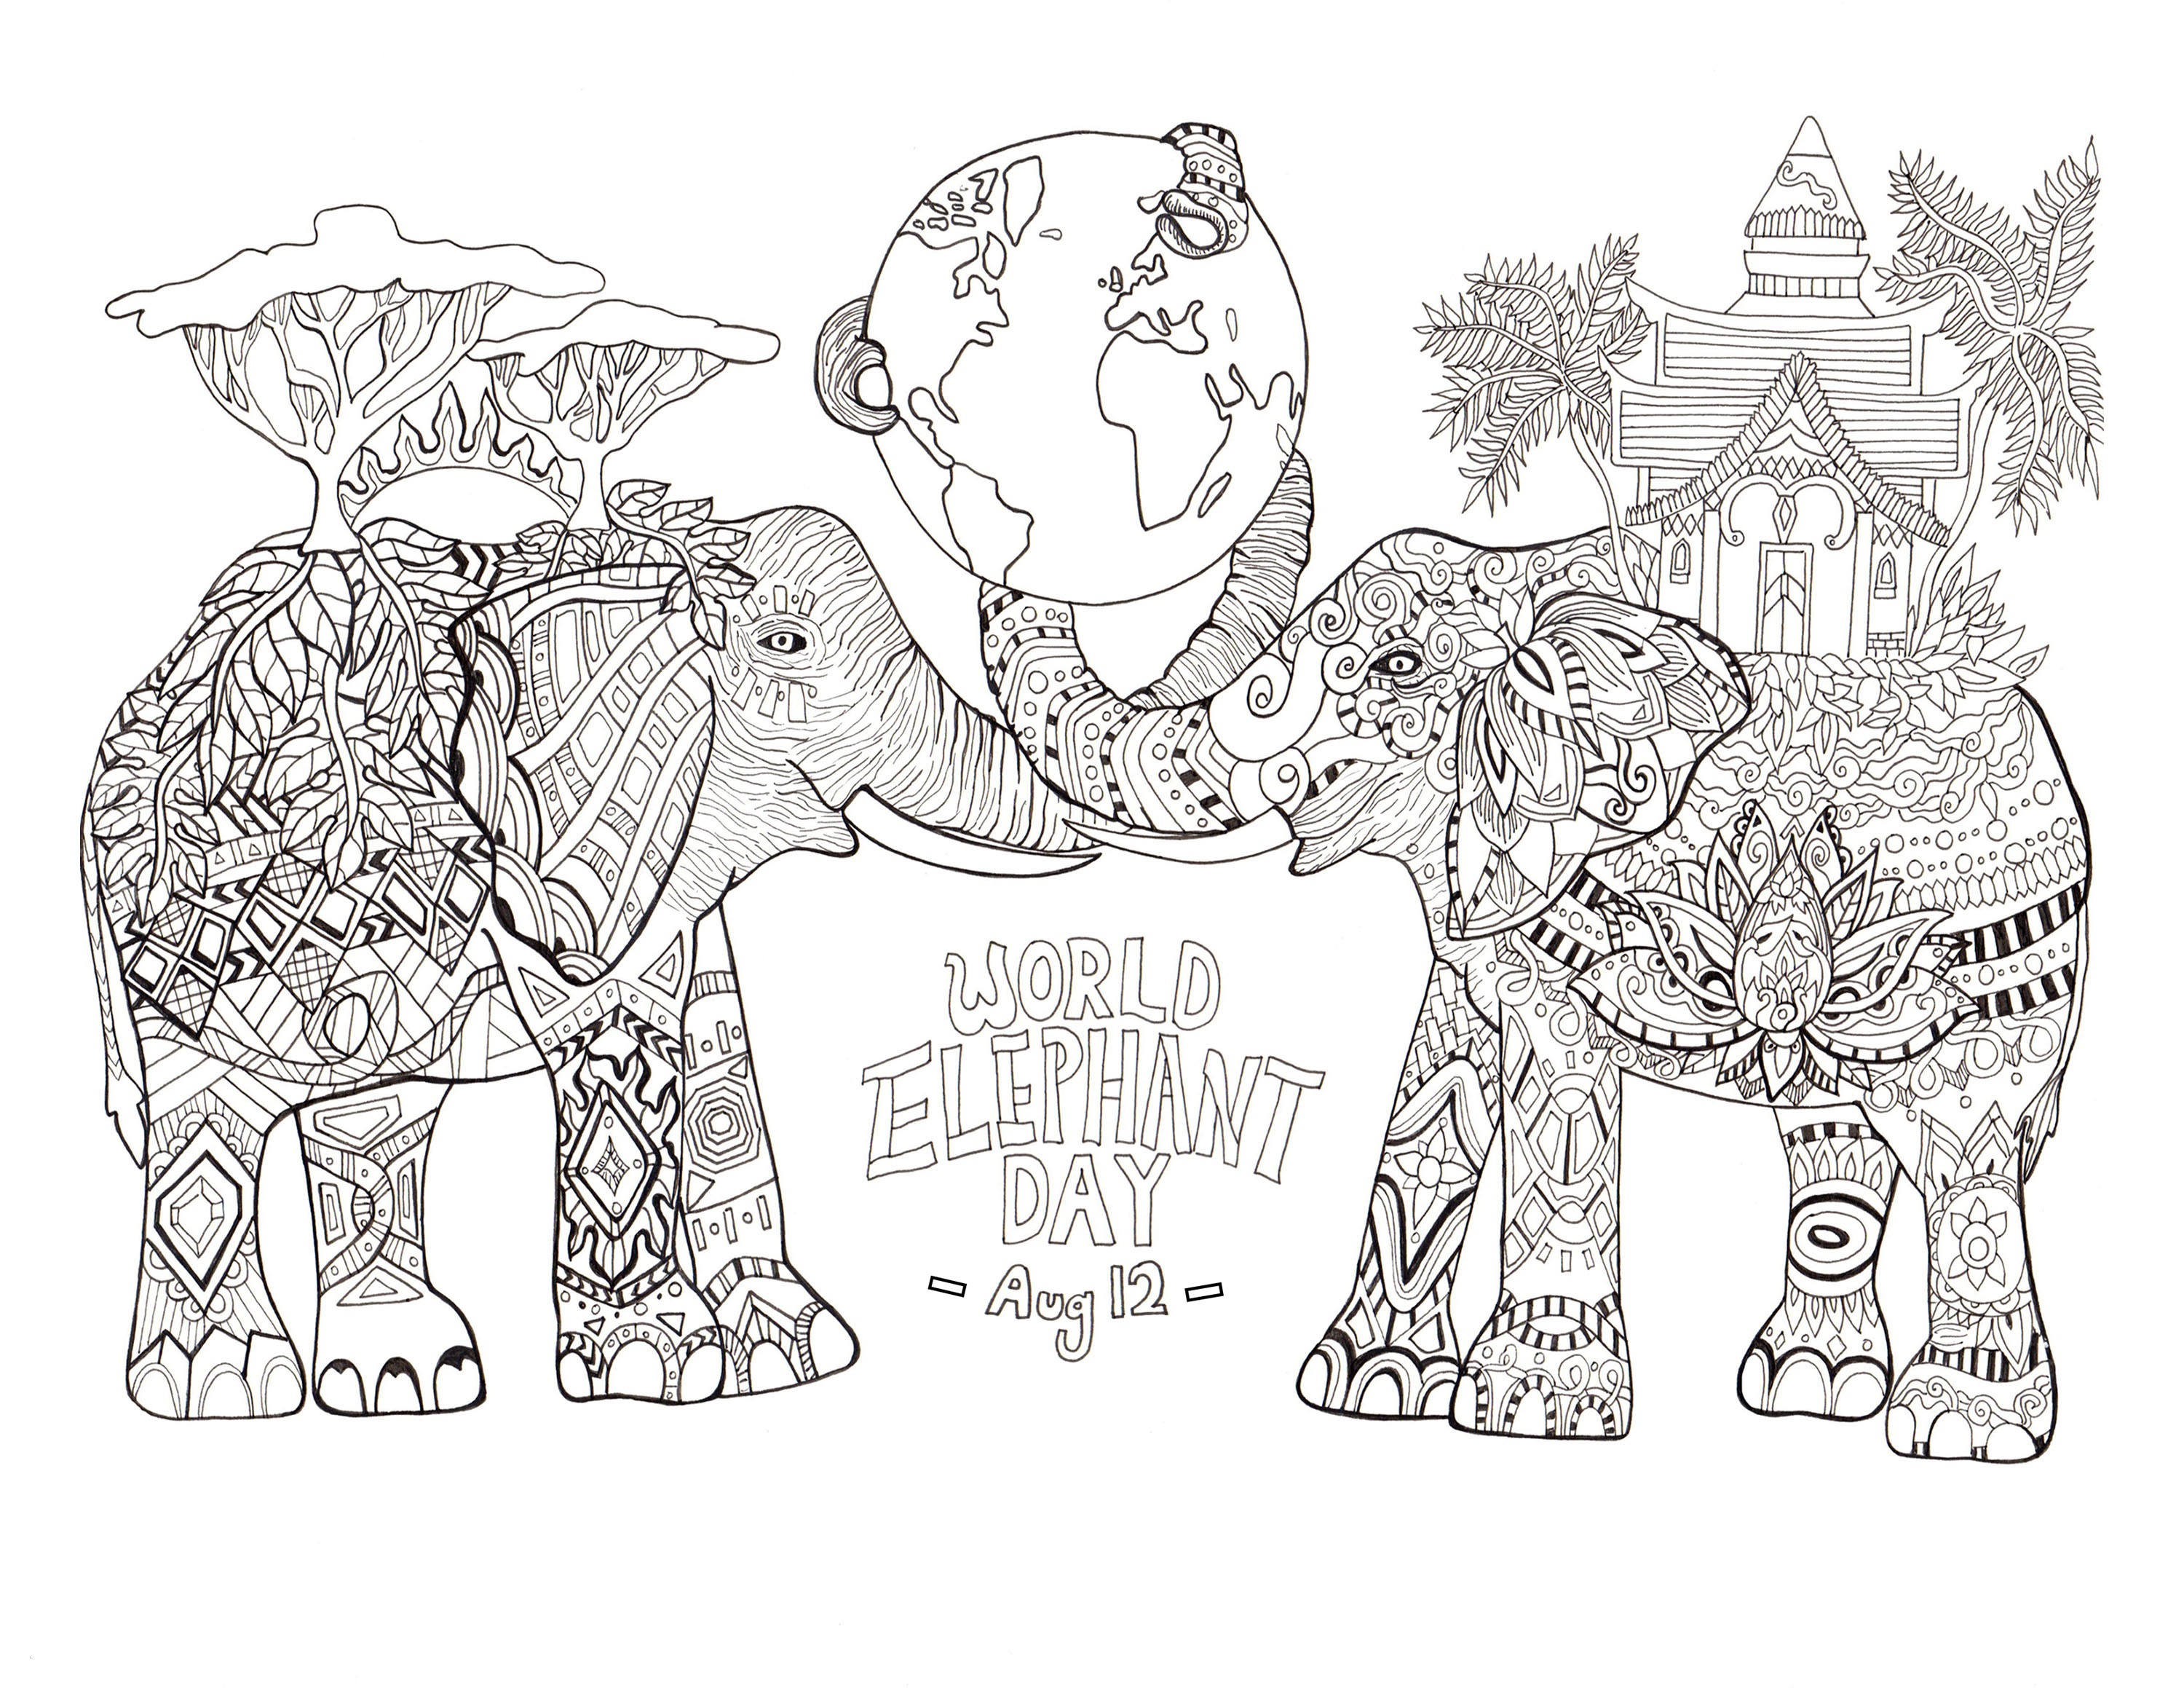 Wild Animal Coloring Page Unique World Elephant Day Elephants Adult Coloring Pages